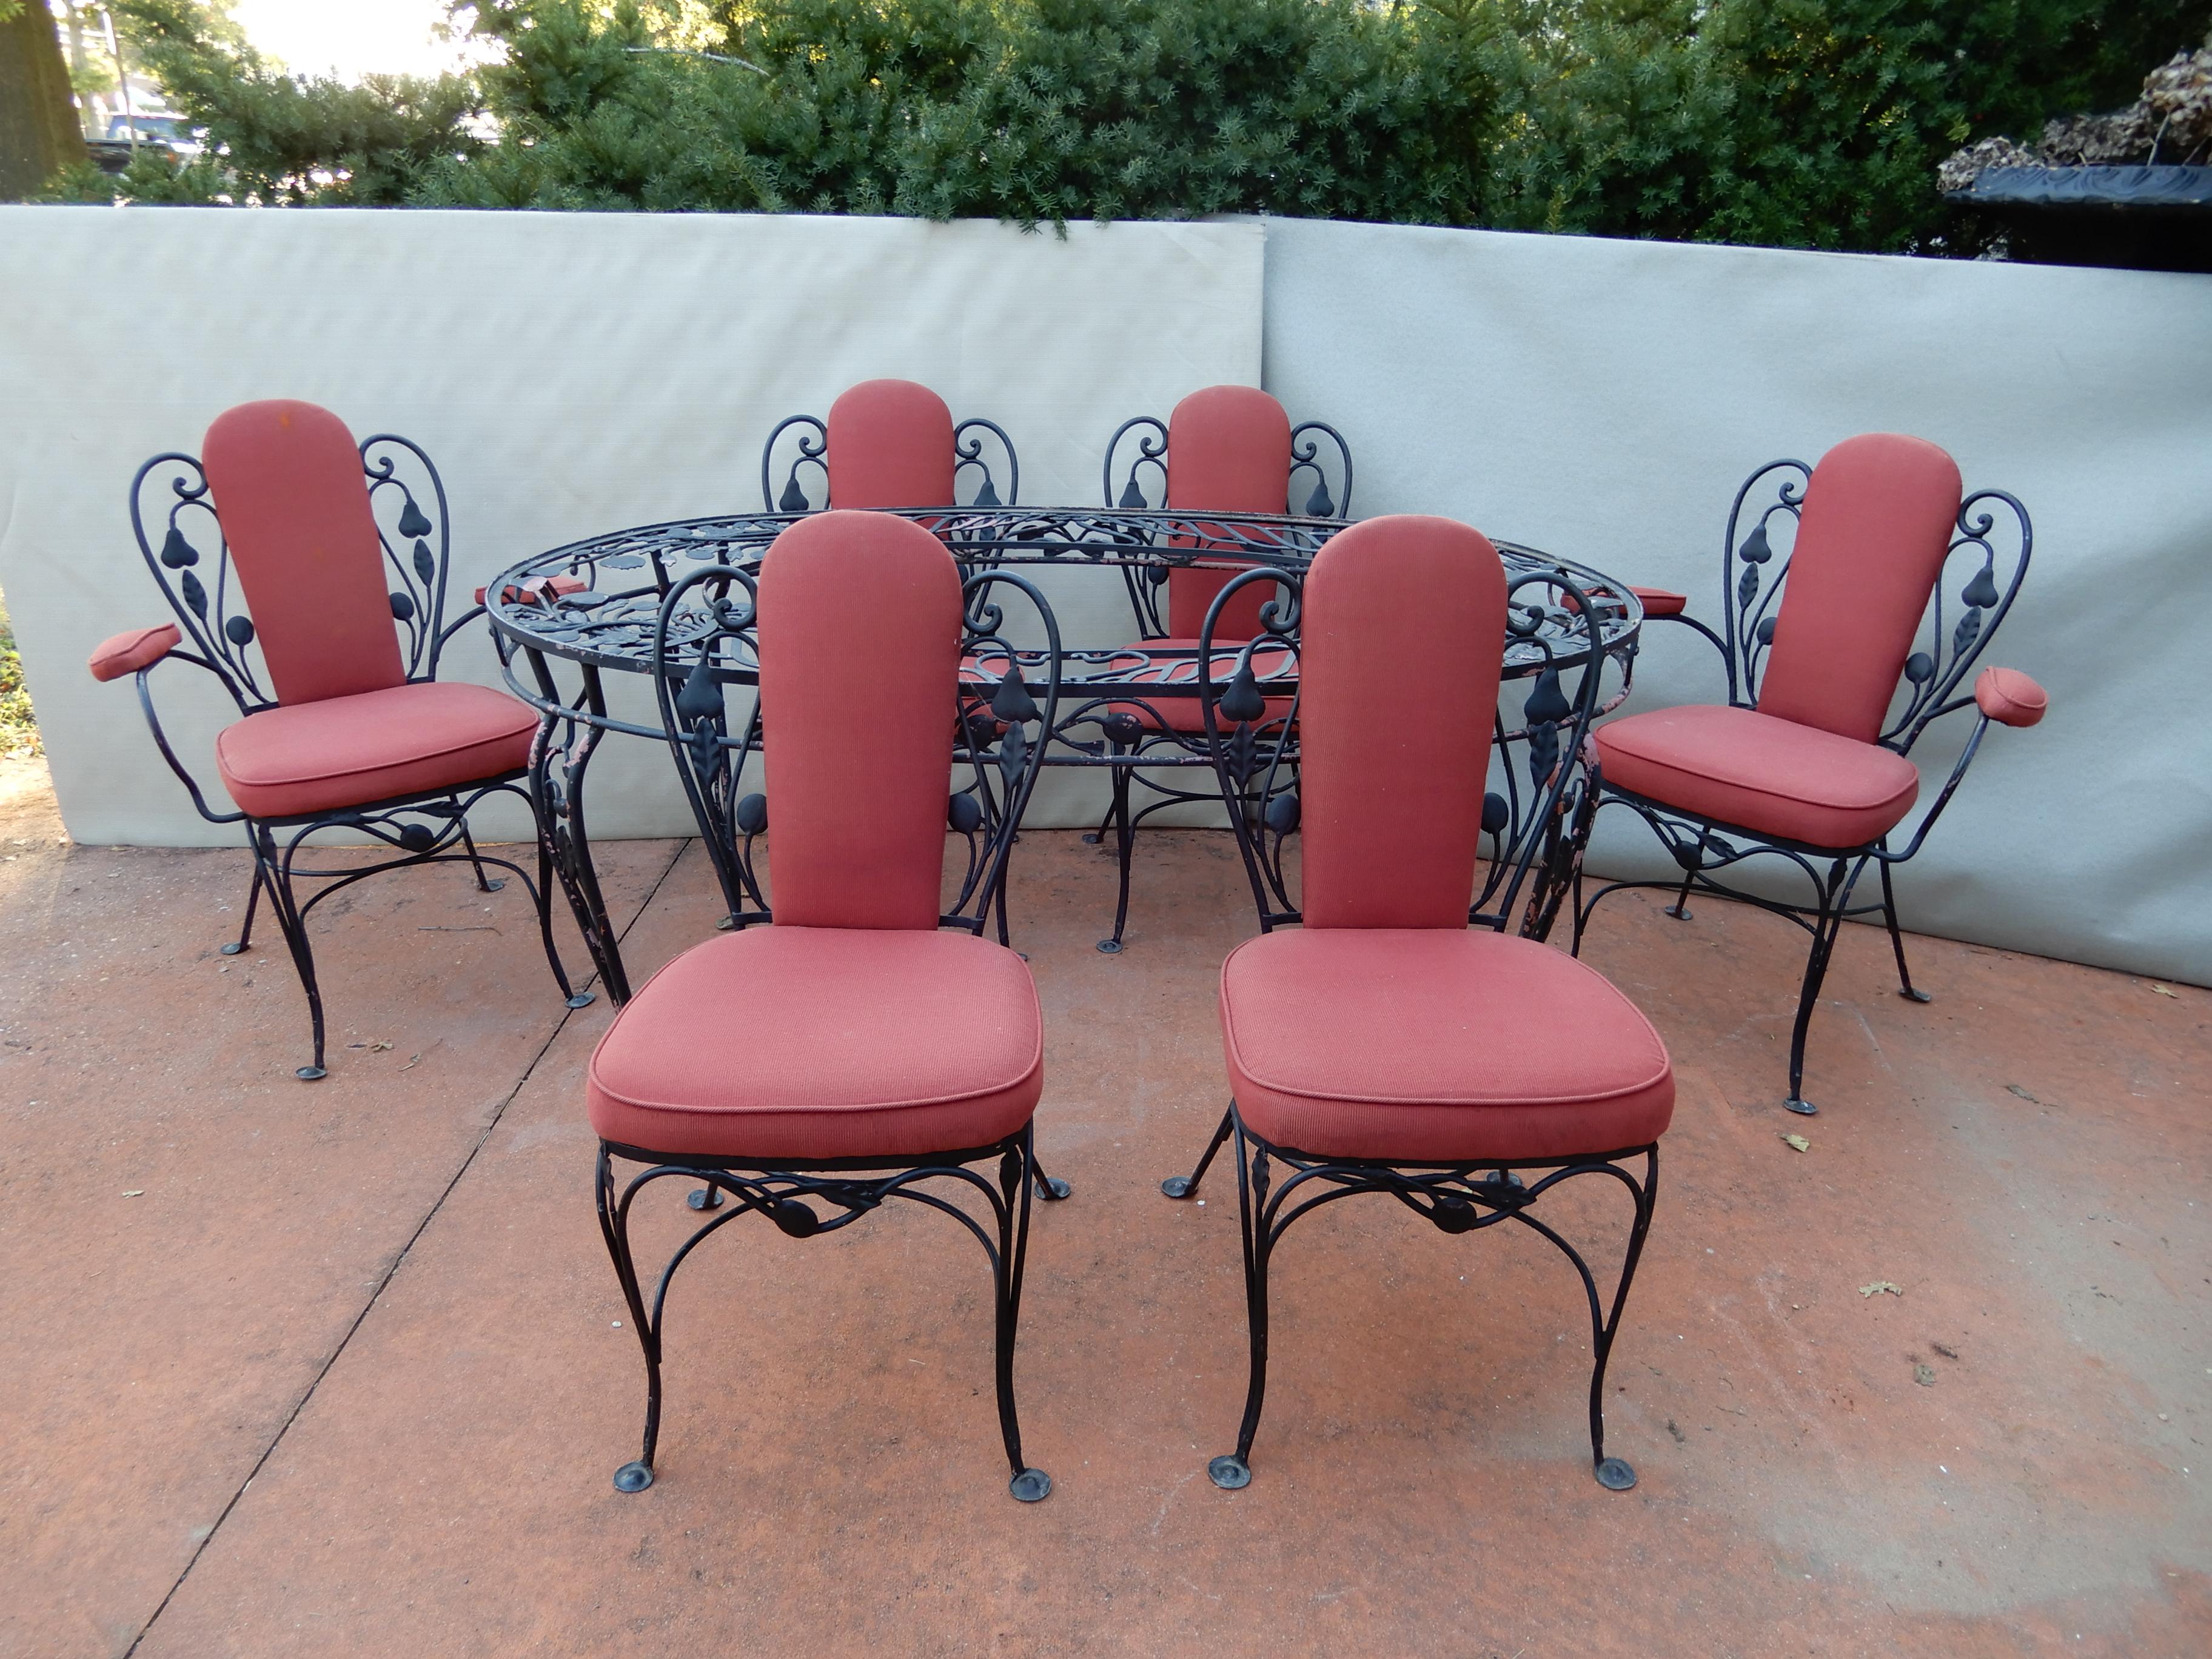 A Salterini wrought iron dining set in the most desirable Della Robbia pattern. This pattern was so successful with its carved fruit, leaves, and grapes that Salterini decided that he also wanted to promote his patio furniture for indoor use as